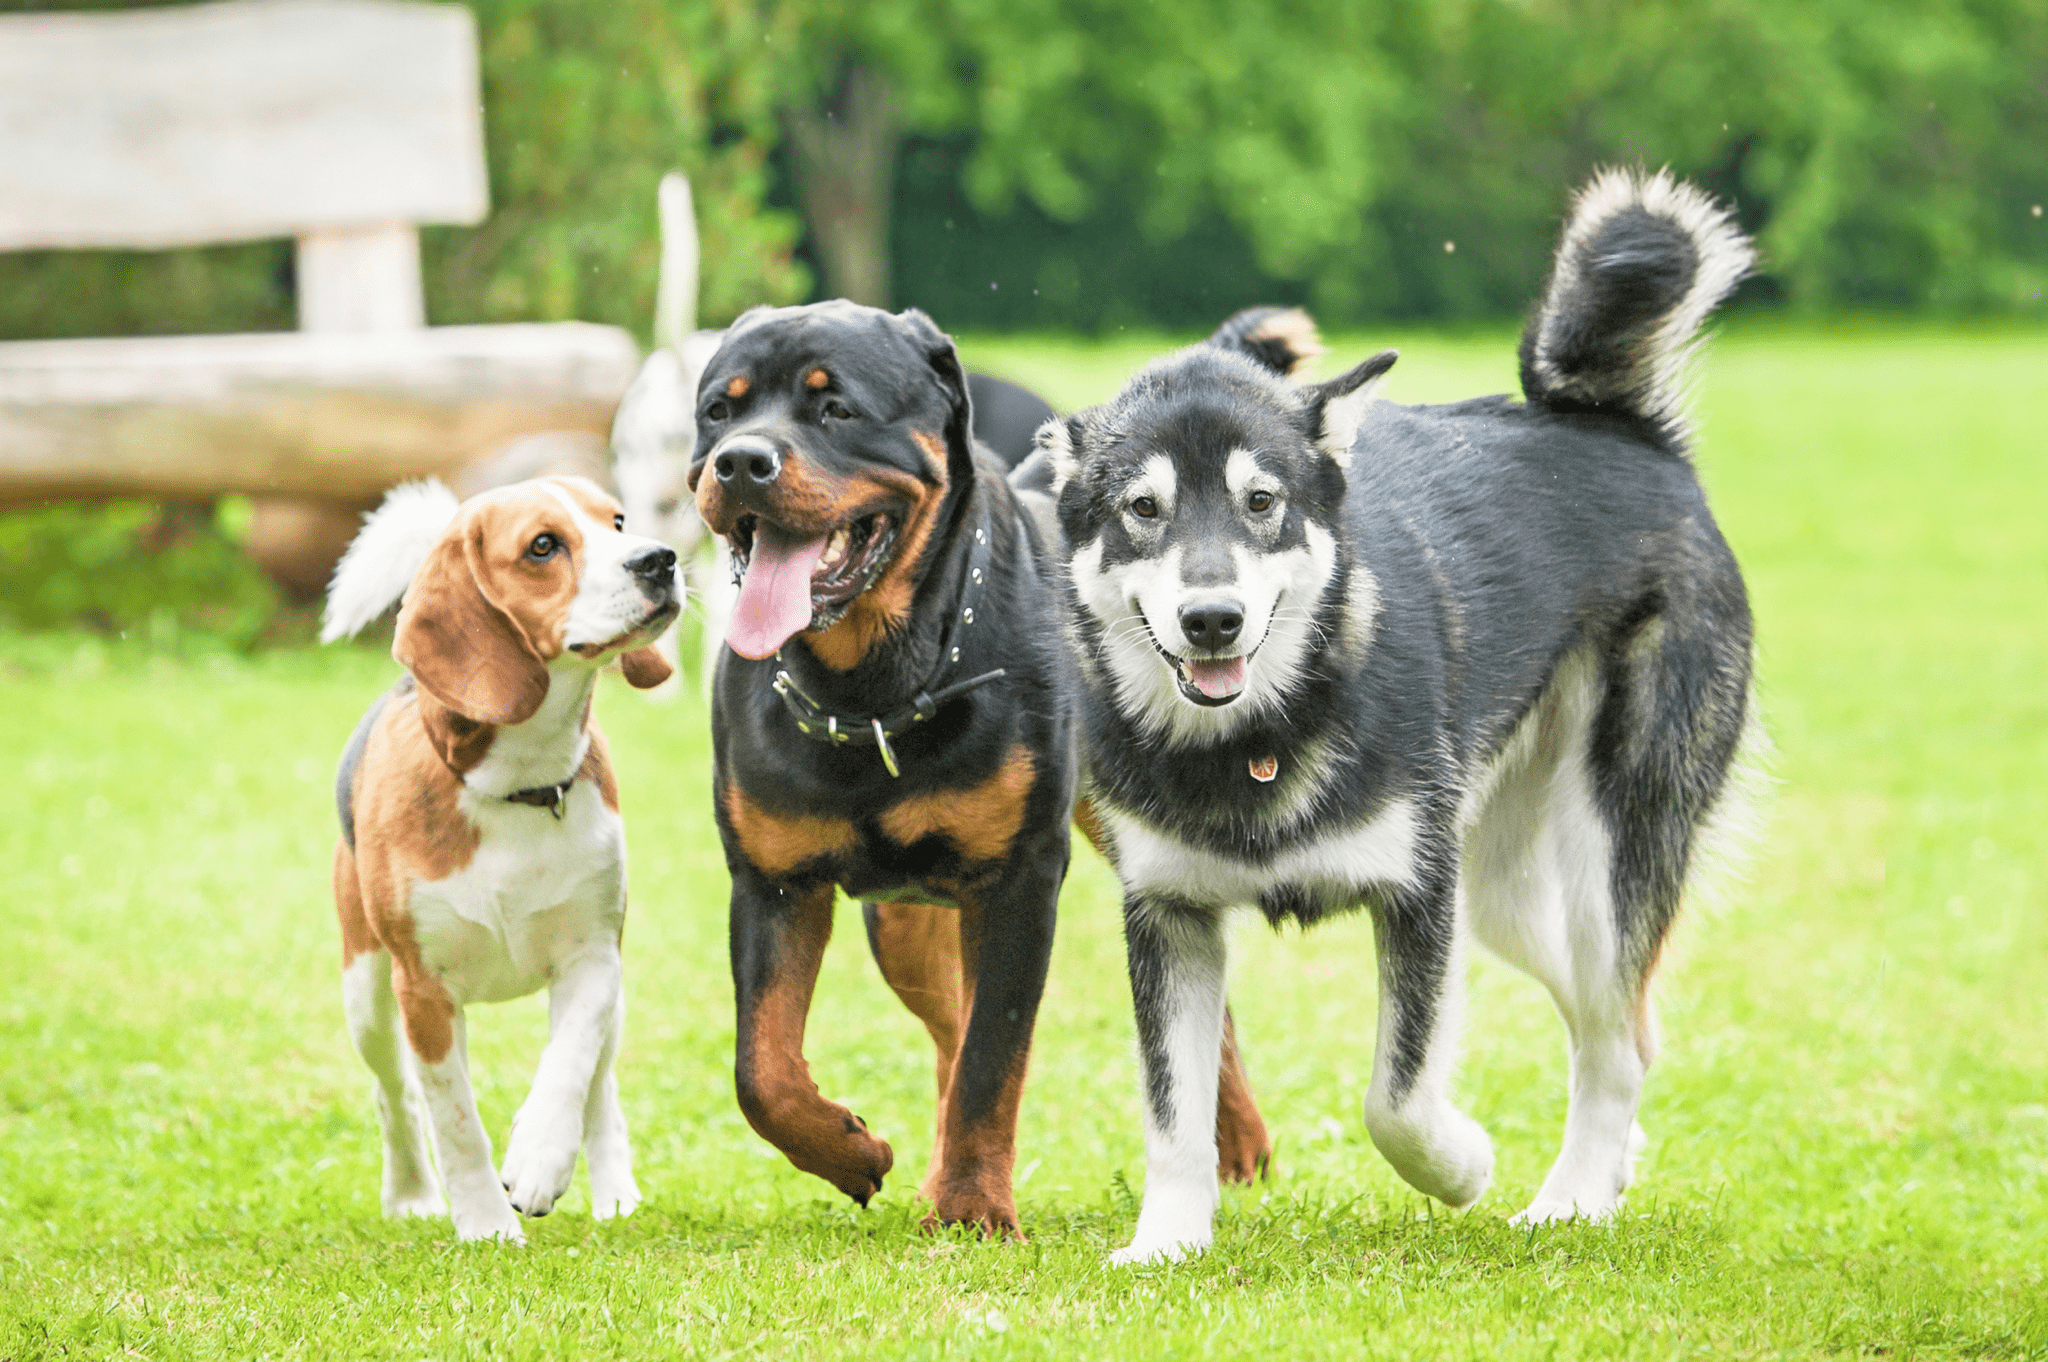 what is the difference between a dog trainer and a behaviorist